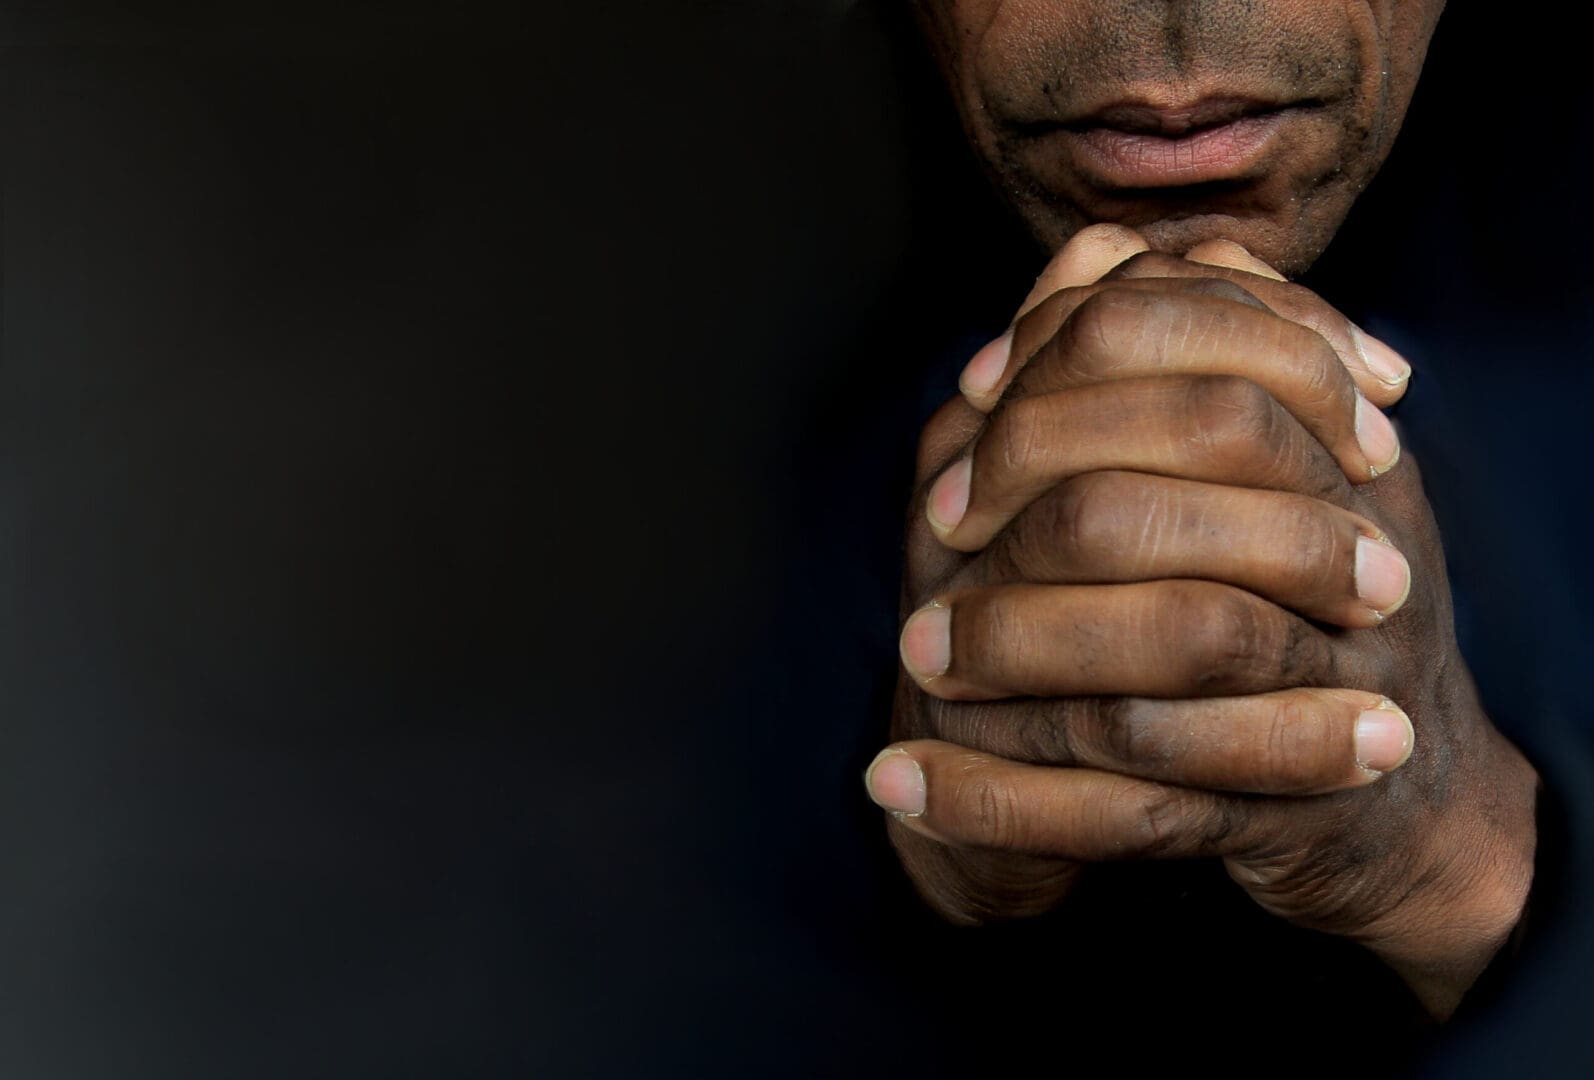 A man with his hands folded in prayer.